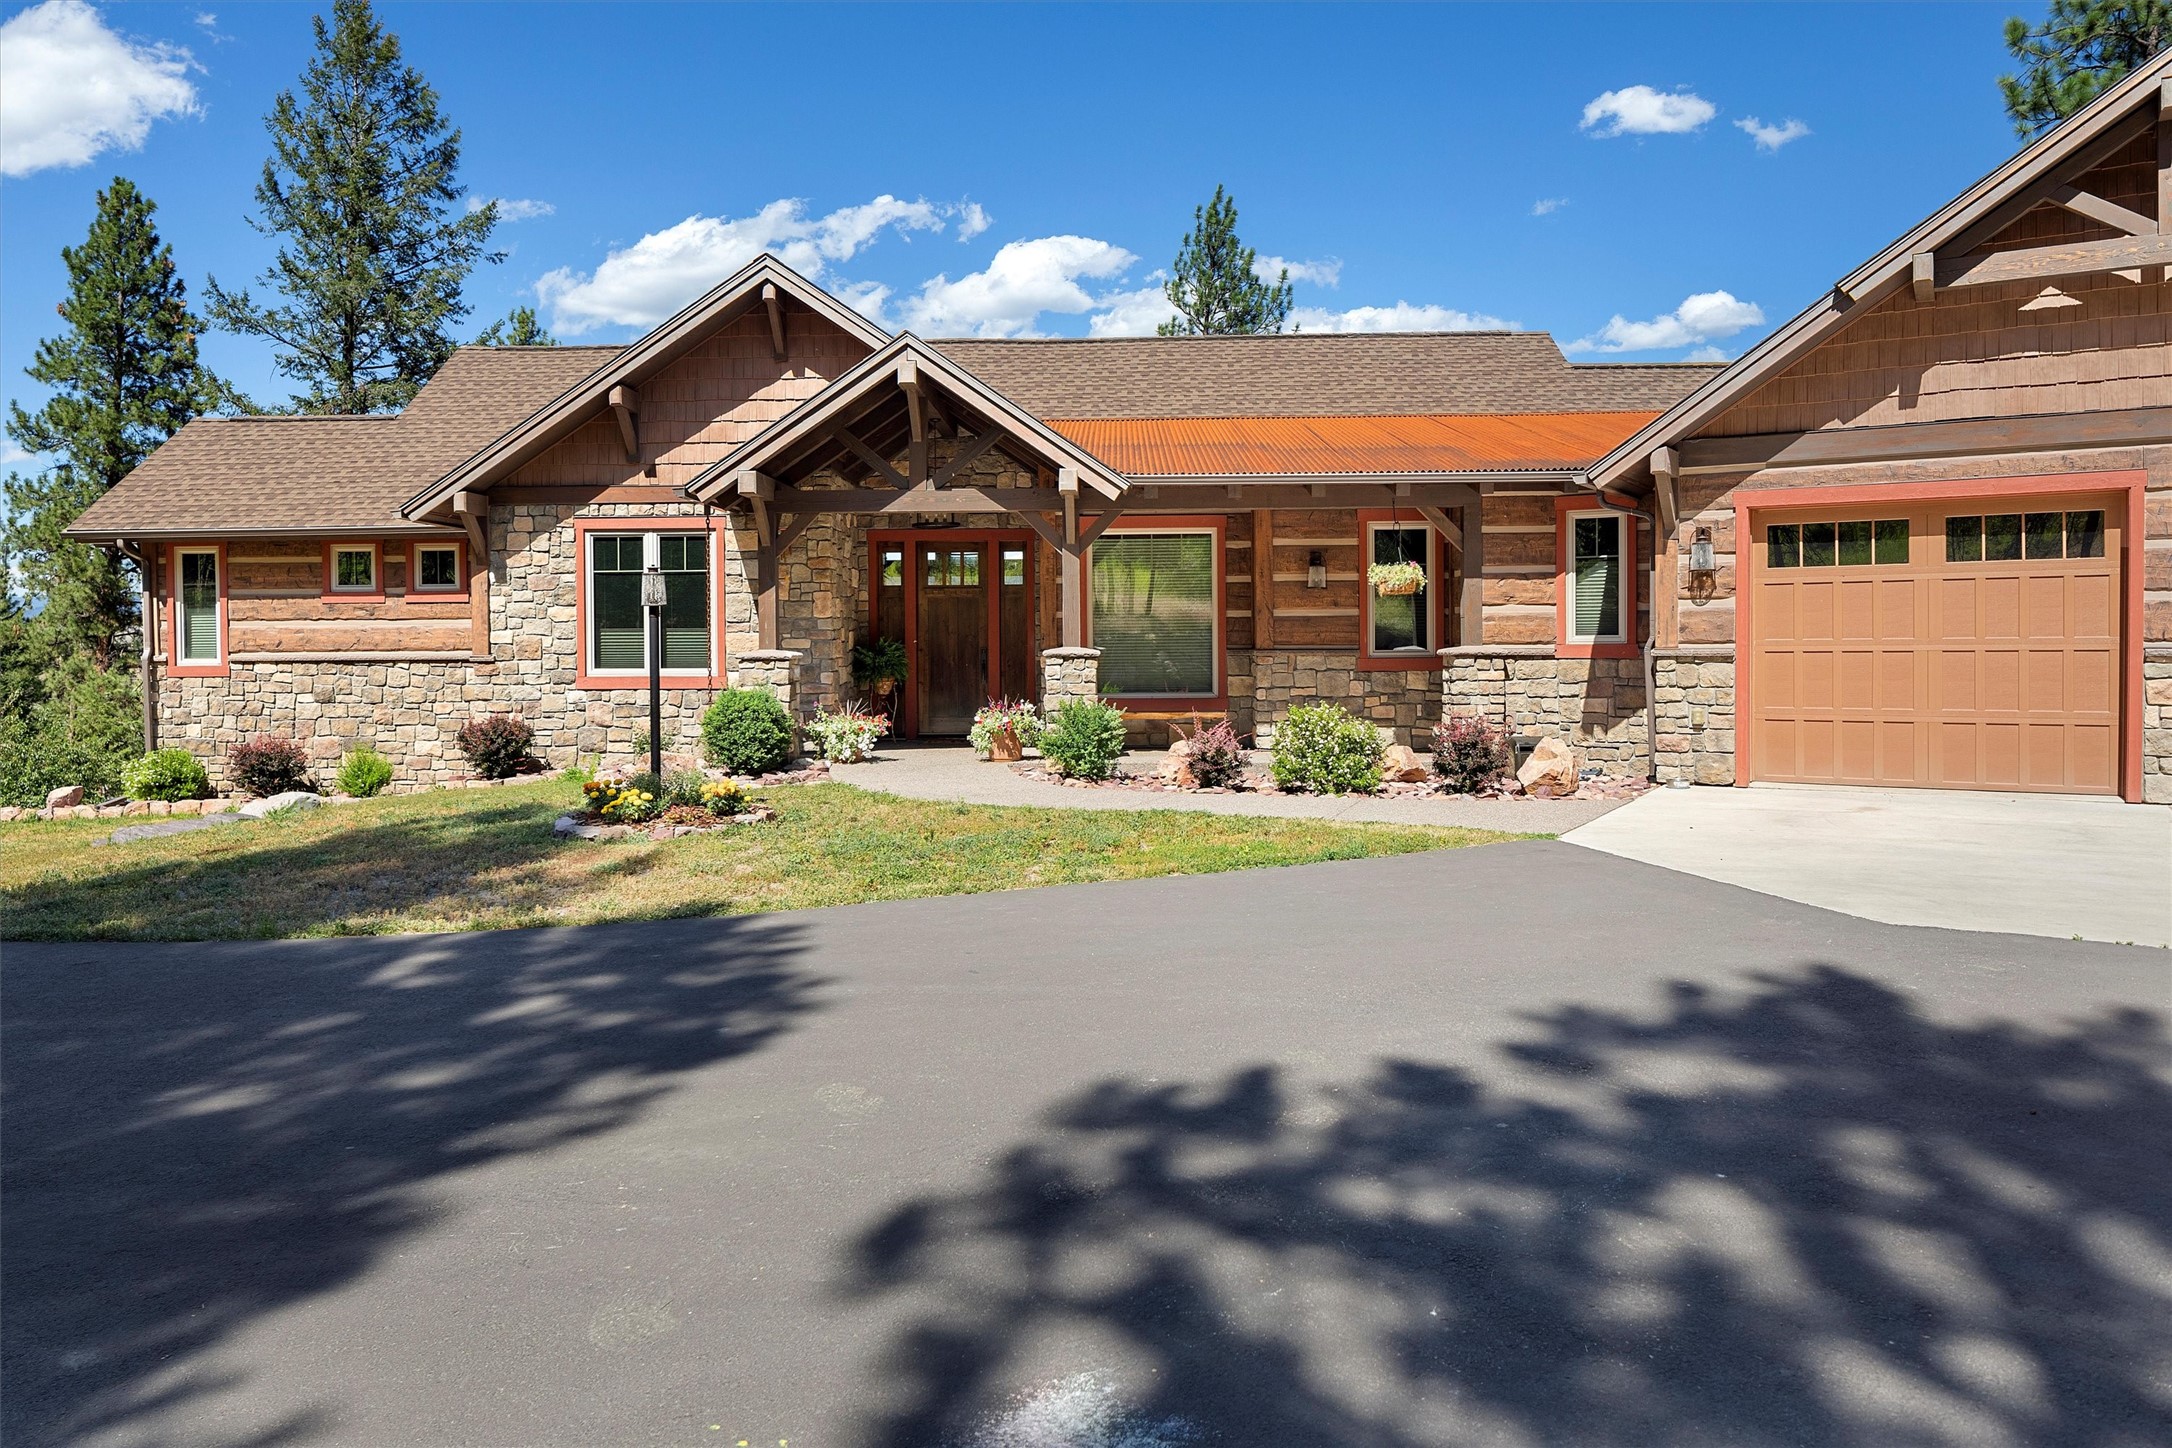 Located on the Big Flat on the west side of Missoula's valley, this property sits on 5 acres of forested land with stunning views of the Clark Fork River and breathtaking sunrises. Built by Edgell Building in 2015, the home features Everlog concrete log siding creating a blend of rustic and modern style.
Outside, enjoy the fire pit patio surrounded by stone walls and landscaping, perfect for gathering under the Montana sky. The screened porch offers a cozy spot for coffee or cocktails and the spacious deck allows for al fresco dining while taking in river views and wildlife including resident bald eagles.
Inside, the main floor boasts a spacious living room with timber framed ceilings and a rock fireplace, flowing into the kitchen and dining area. The primary suite with a walk-in closet and on-suite bathroom, a second bedroom/office, full bath, half bath and laundry facilities complete the main level. The daylight walkout basement provides ample space for entertaining, with two bedrooms, a full bath, and a family room featuring a wet bar.  The home is equipped for comfort year-round, with a geothermal heat pump, gas fireplace, central air conditioning, and a heated triple car garage.
With its picturesque setting and quality craftsmanship, this property offers the epitome of Montana living—a peaceful retreat to create lasting memories with loved ones.

Contact Carroll Anne Sowerby at 406-544-9537 or your real estate professional.